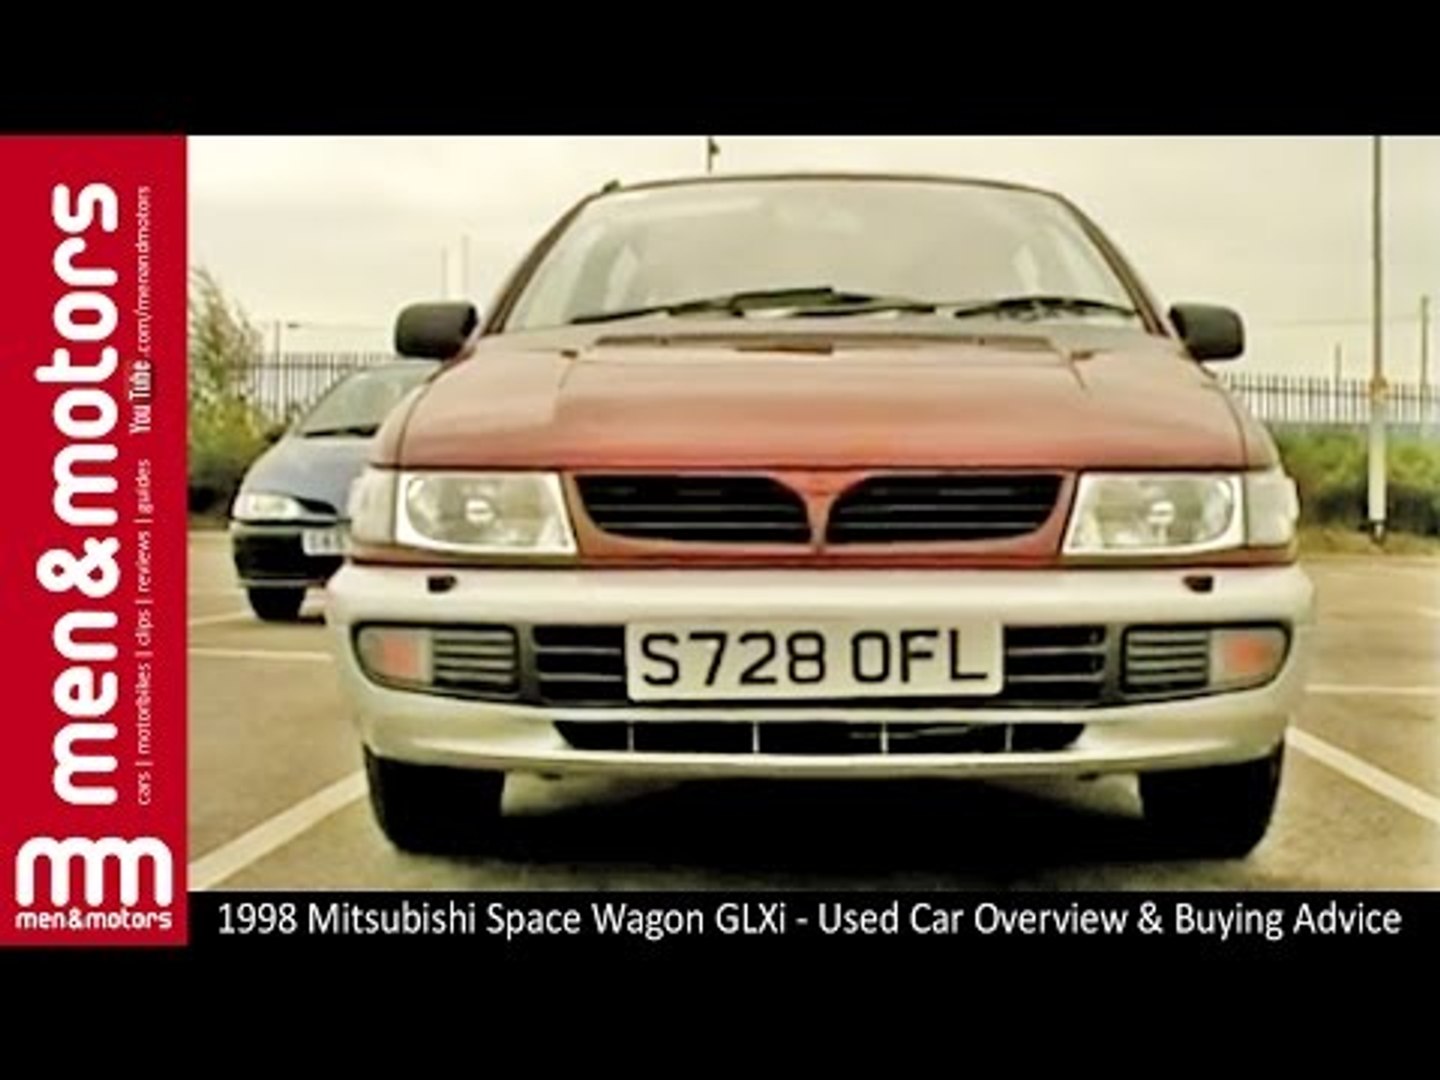 1998 Mitsubishi Space Wagon GLXi - Used Car Overview & Buying